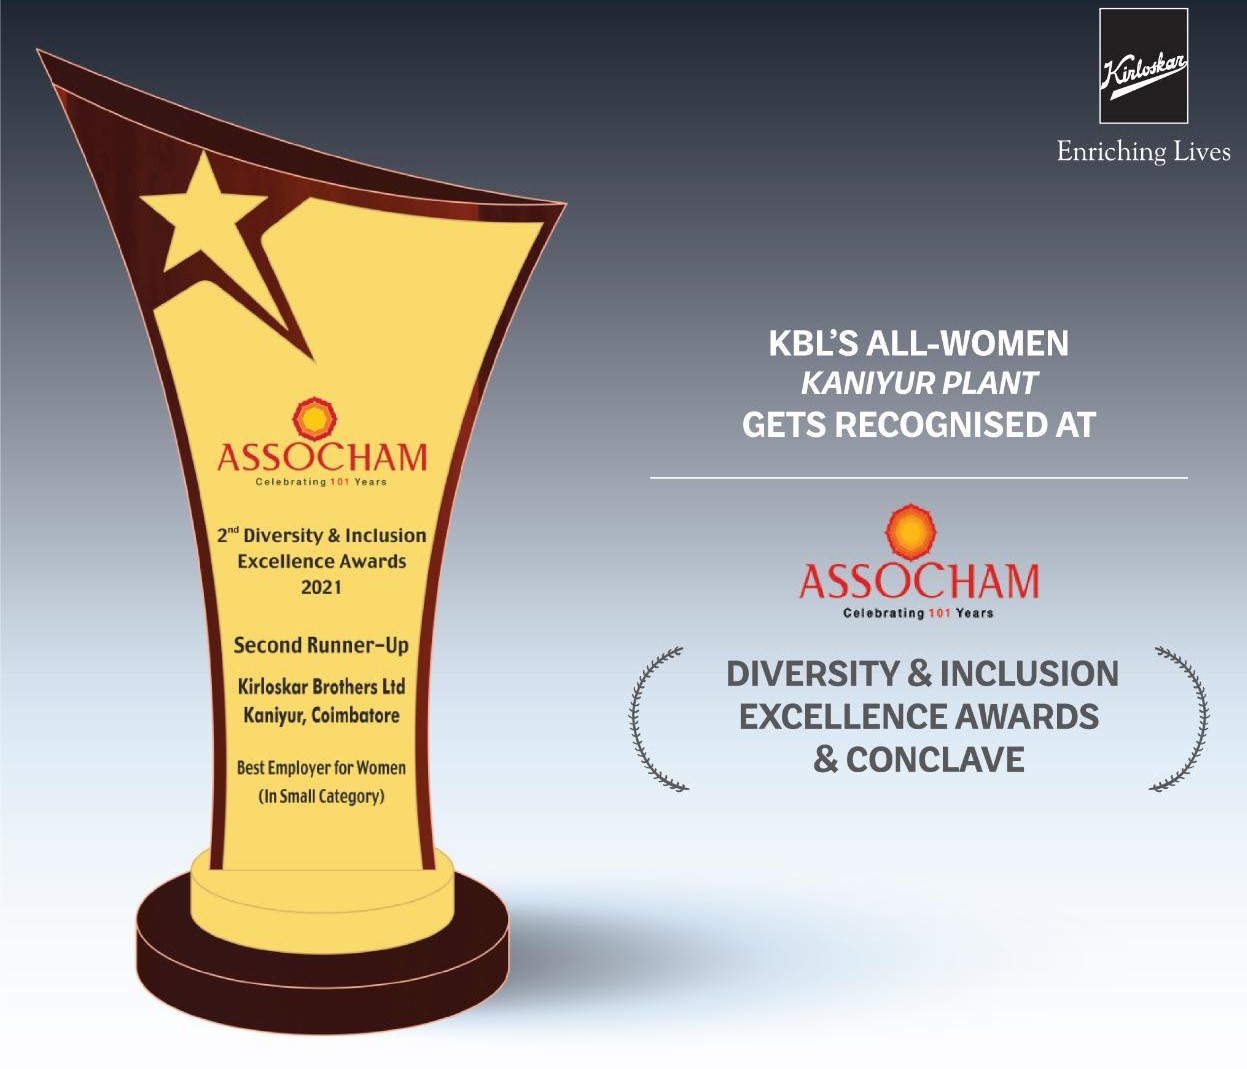 KBL’s all-women manufacturing facility located at Kaniyur near Coimbatore, Tamil Nadu, was honoured for being the Best Employer for Women.